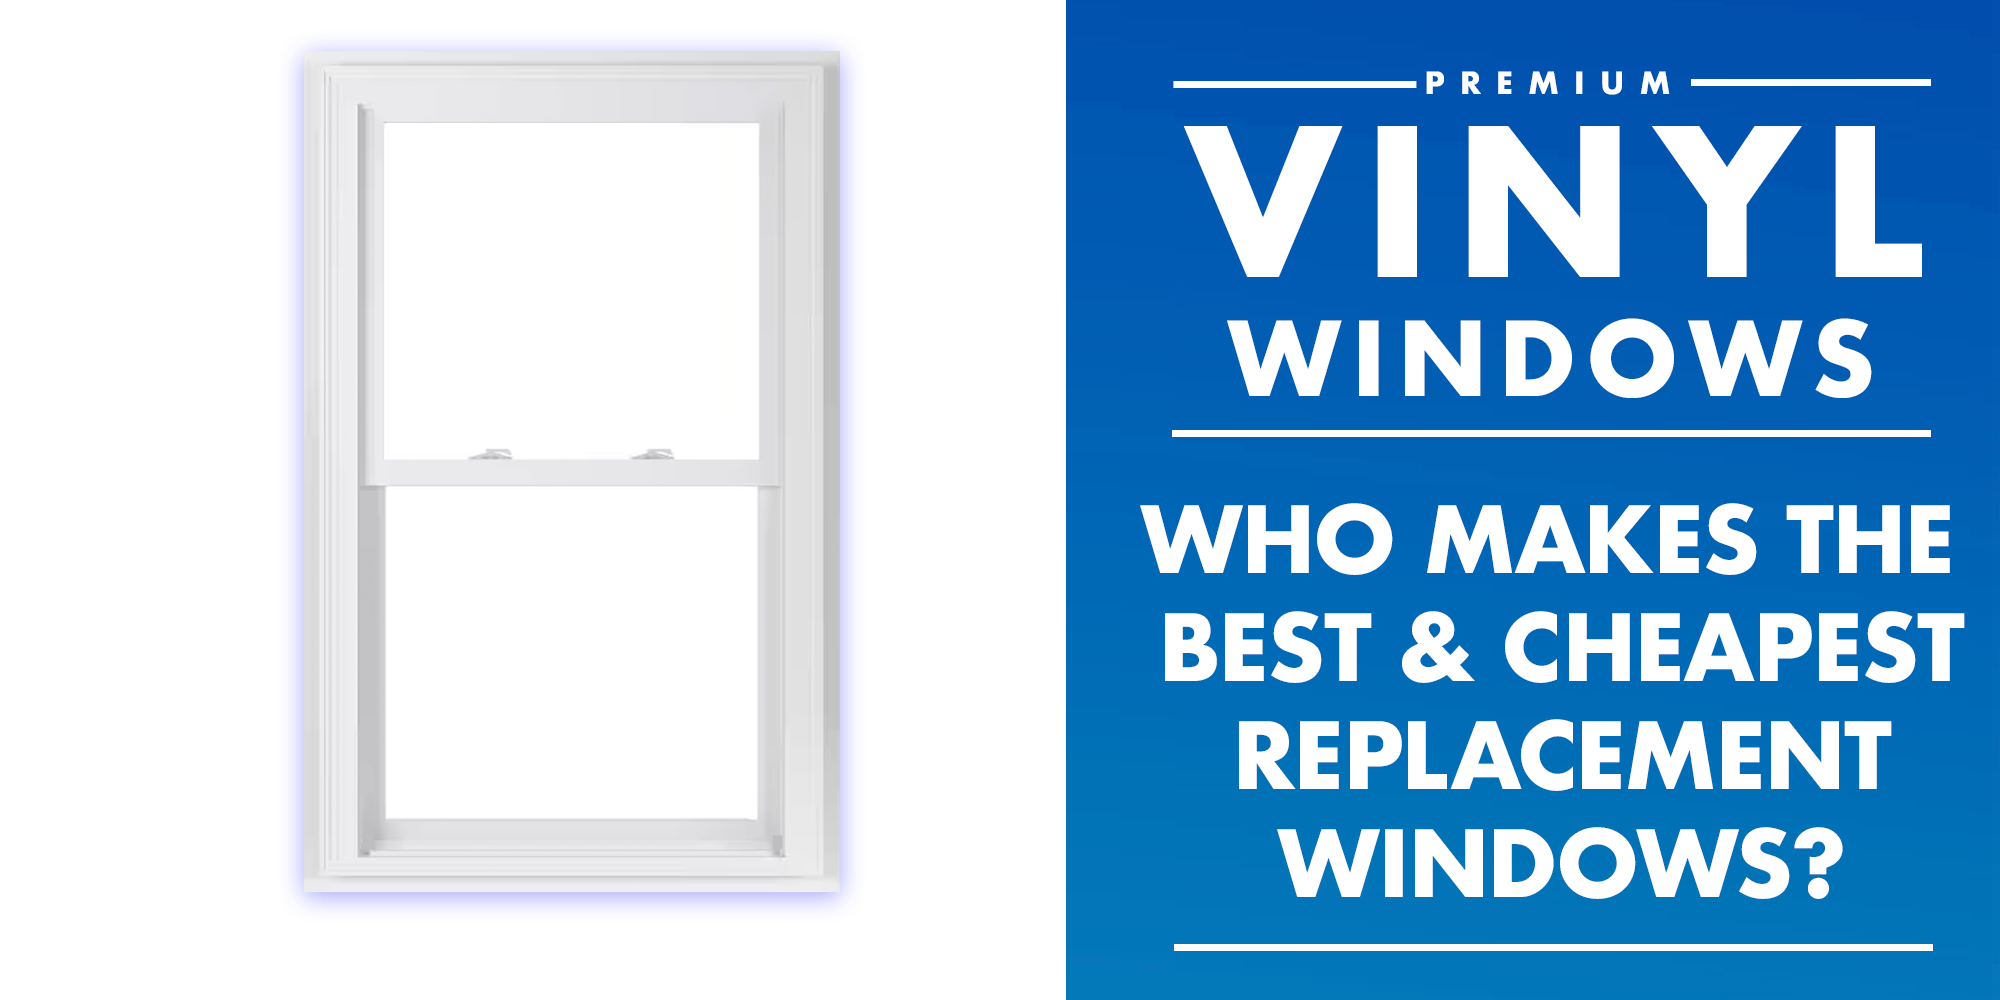 Who makes the best cheapest windows